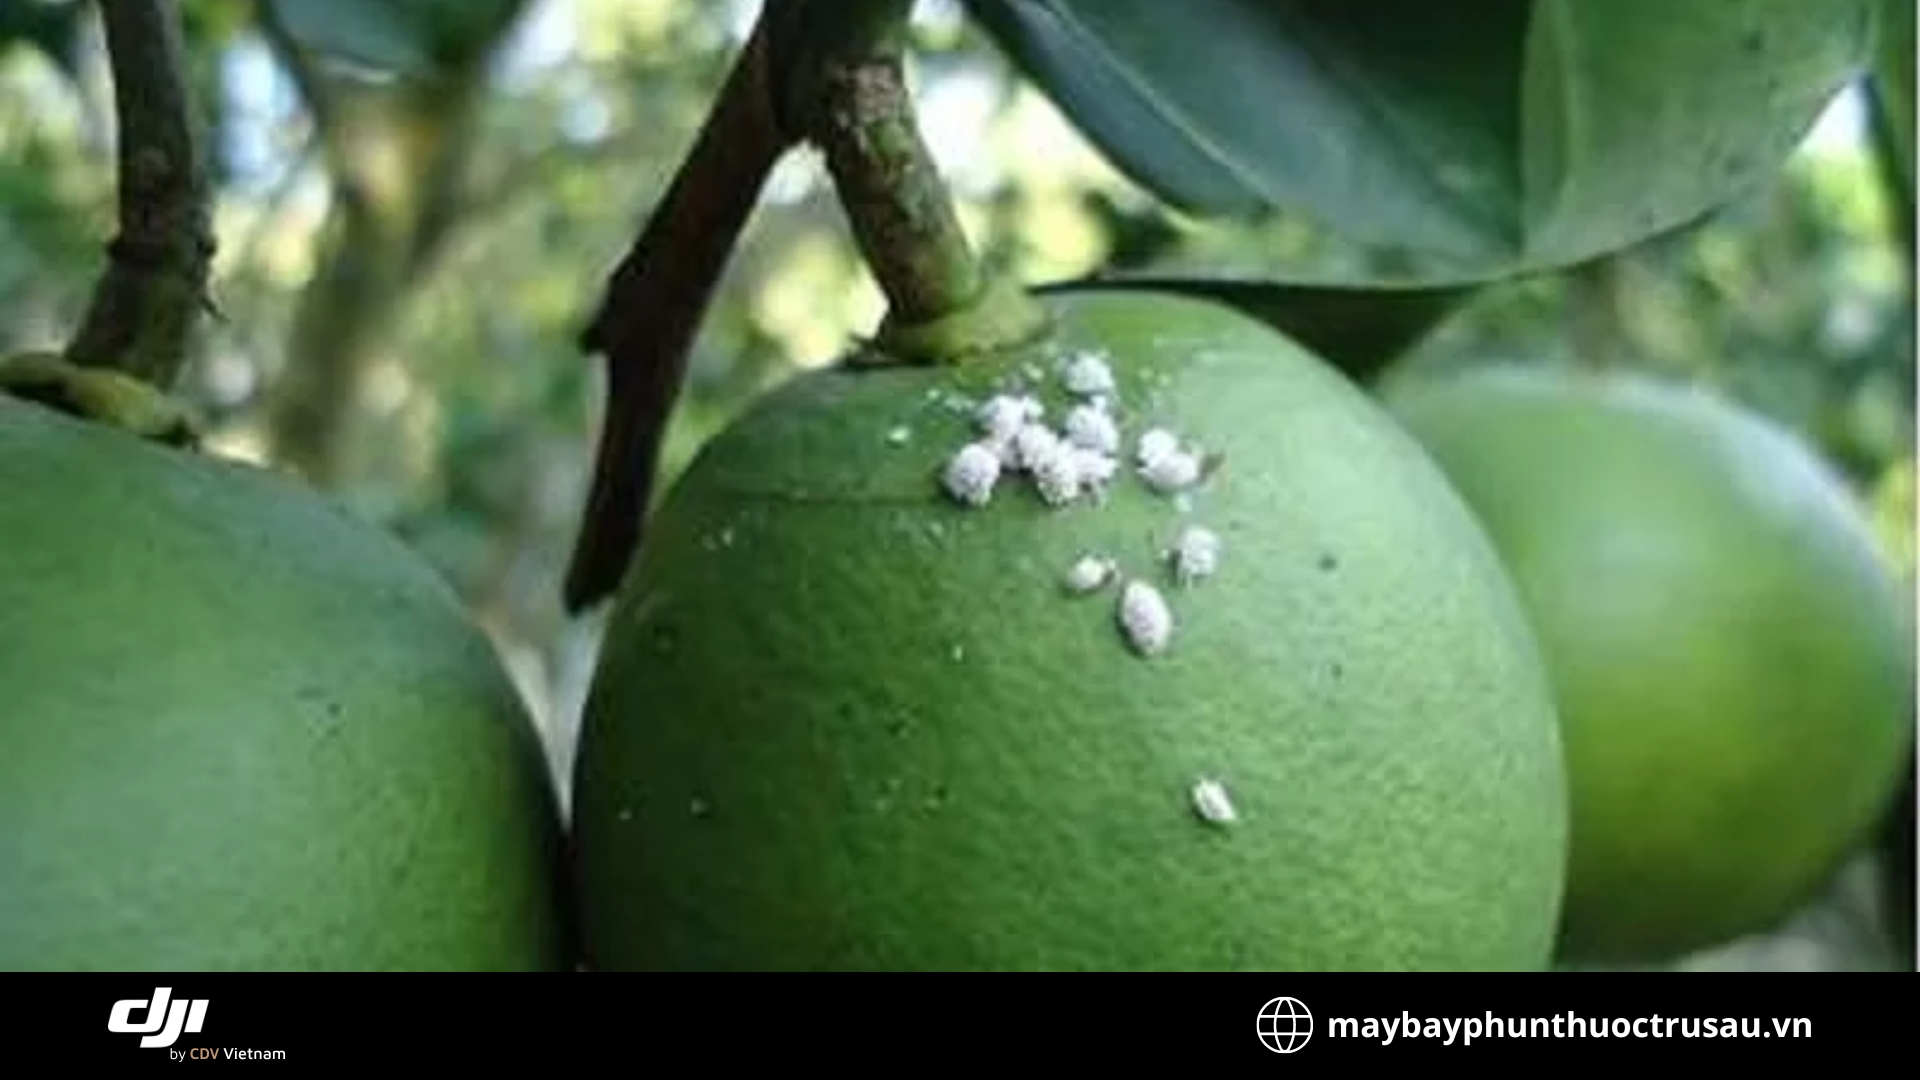 Rệp sáp (Scale insects)